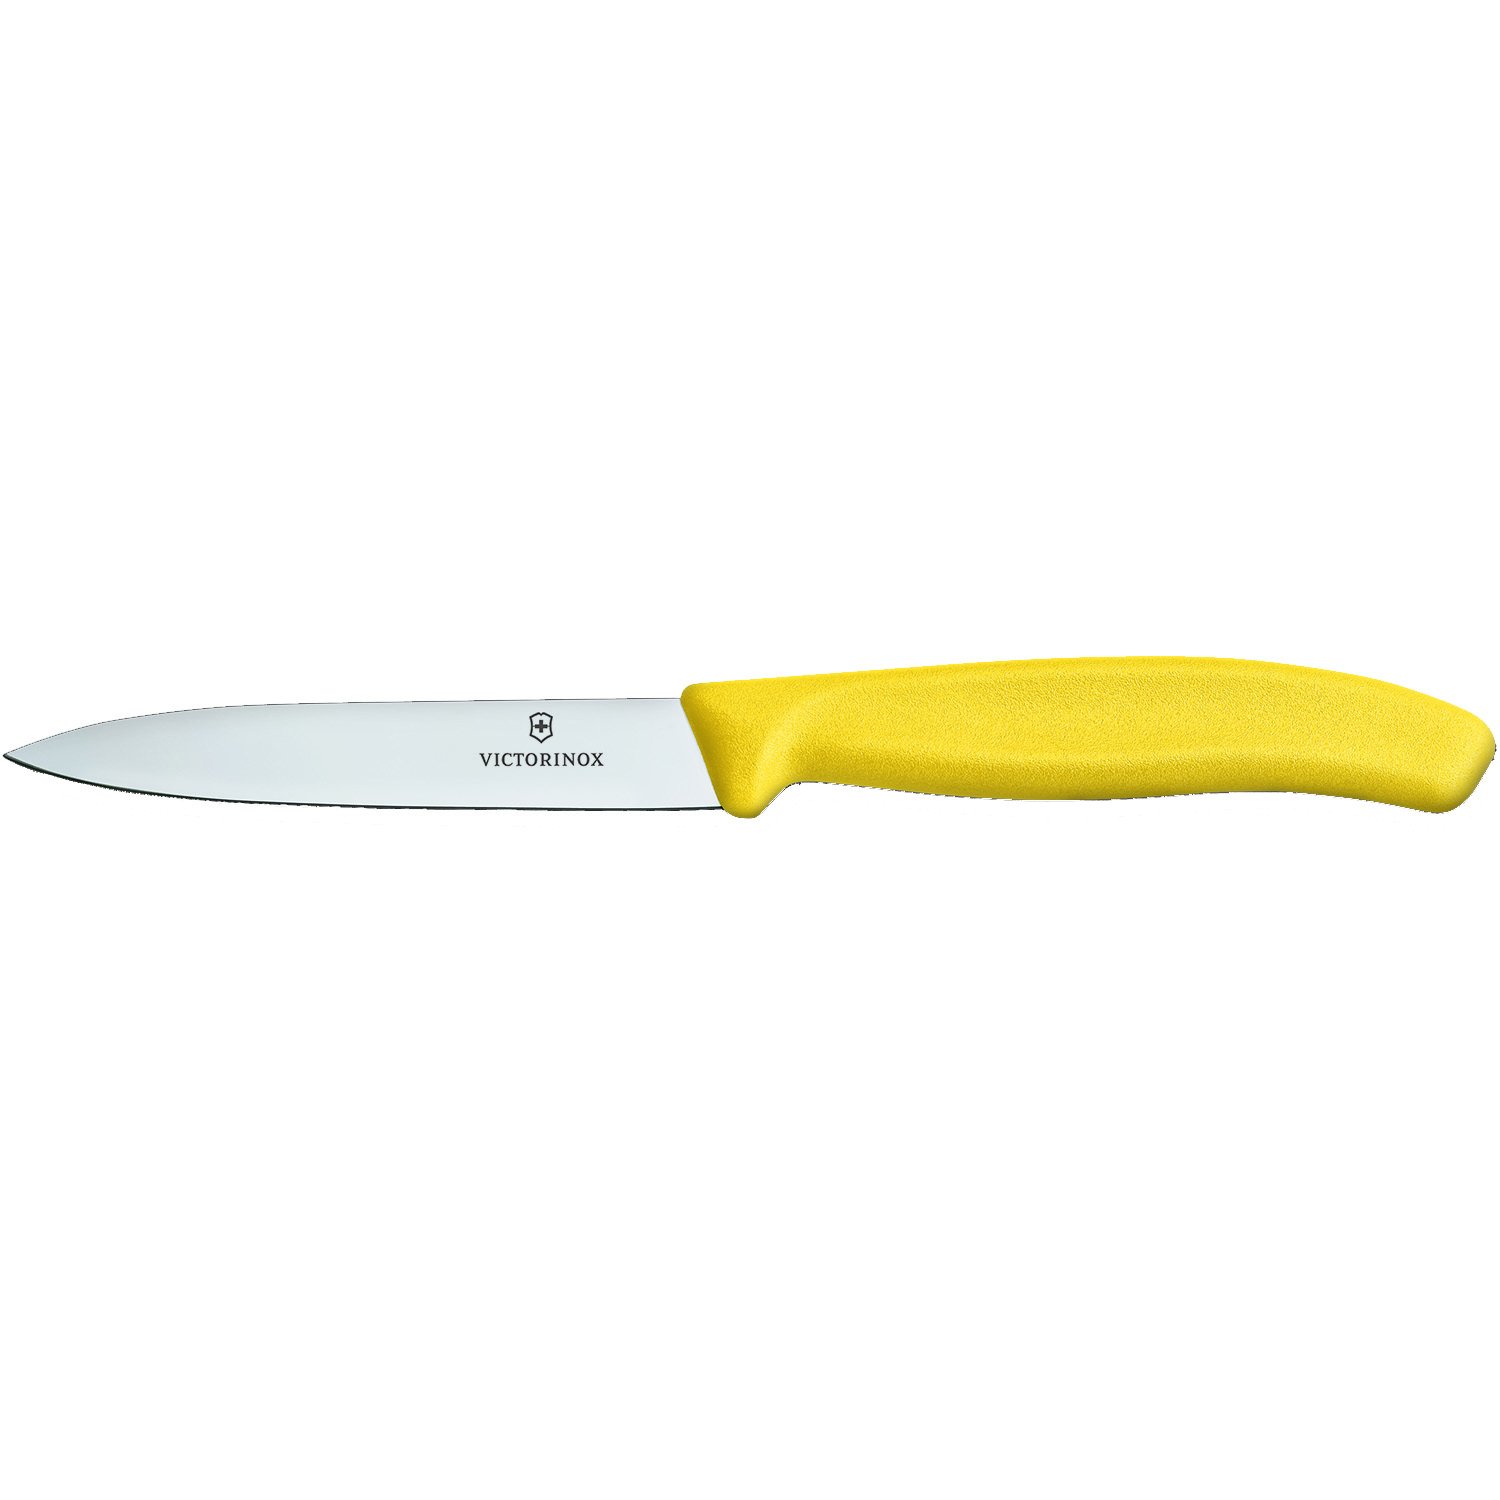 Victorinox Swissclassic 6.7706 - Knives (Stainless Steel, Yellow, Stainless